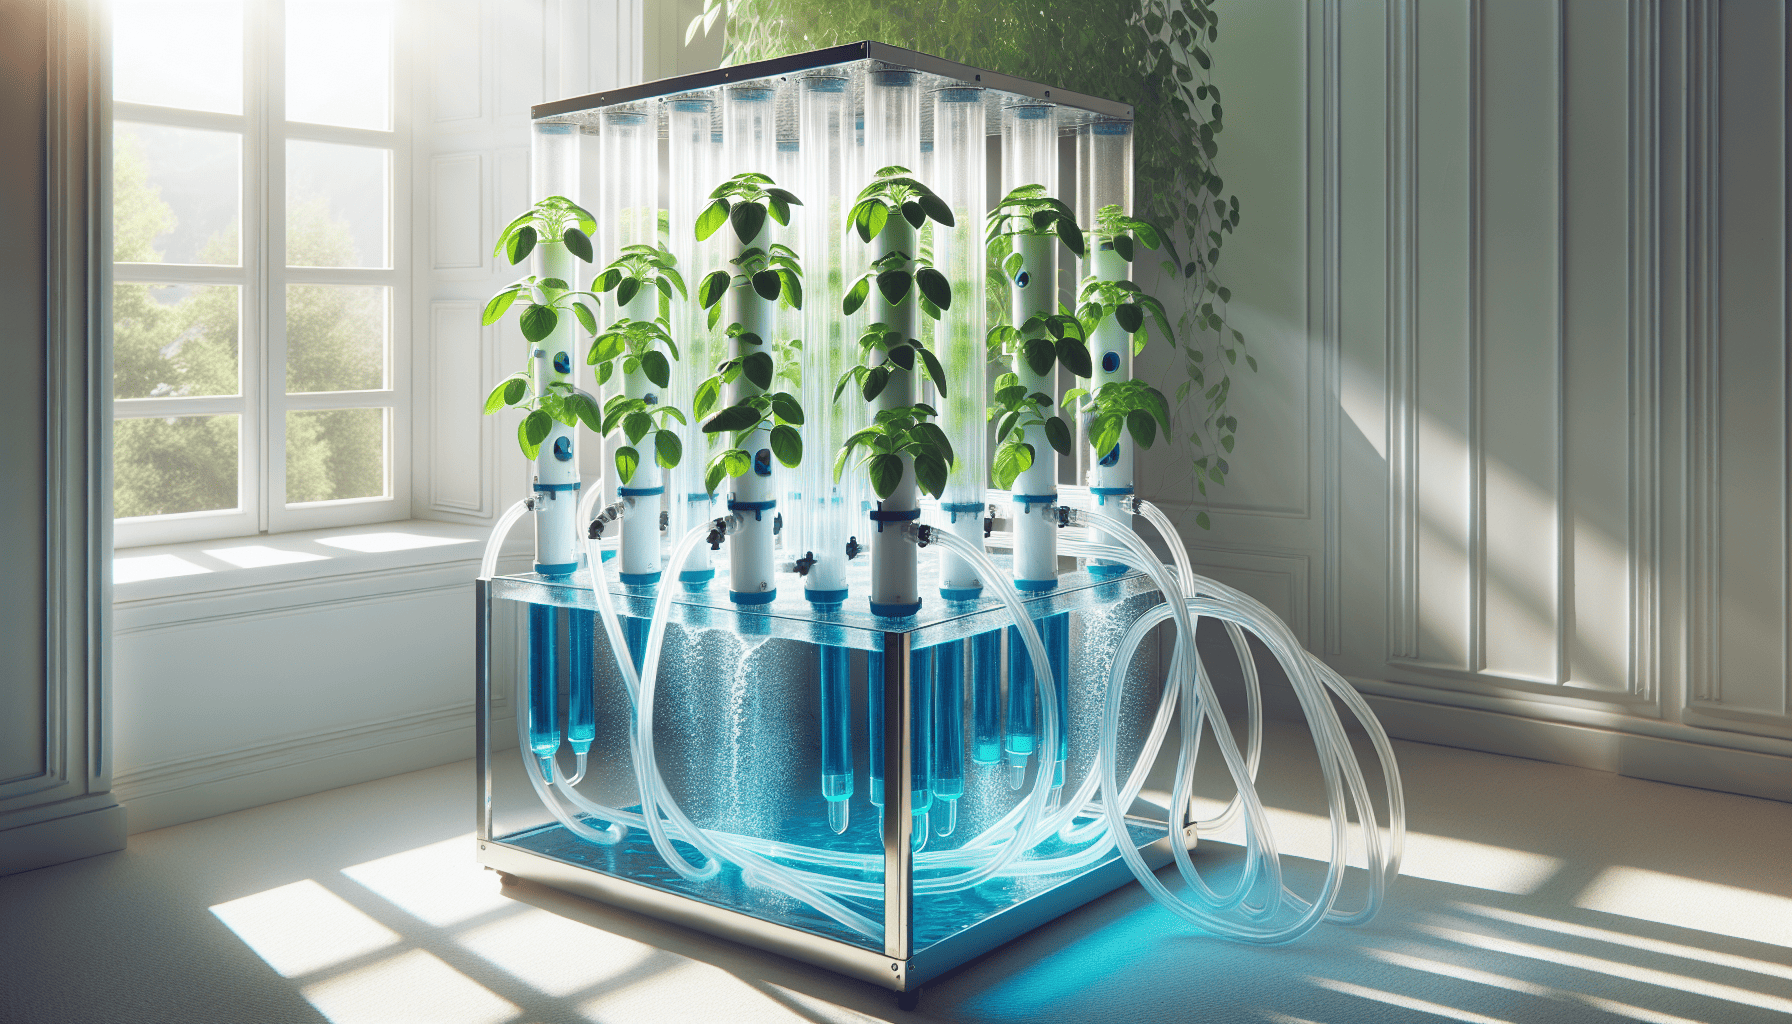 Hydroponic system with nutrient solution flowing through tubes